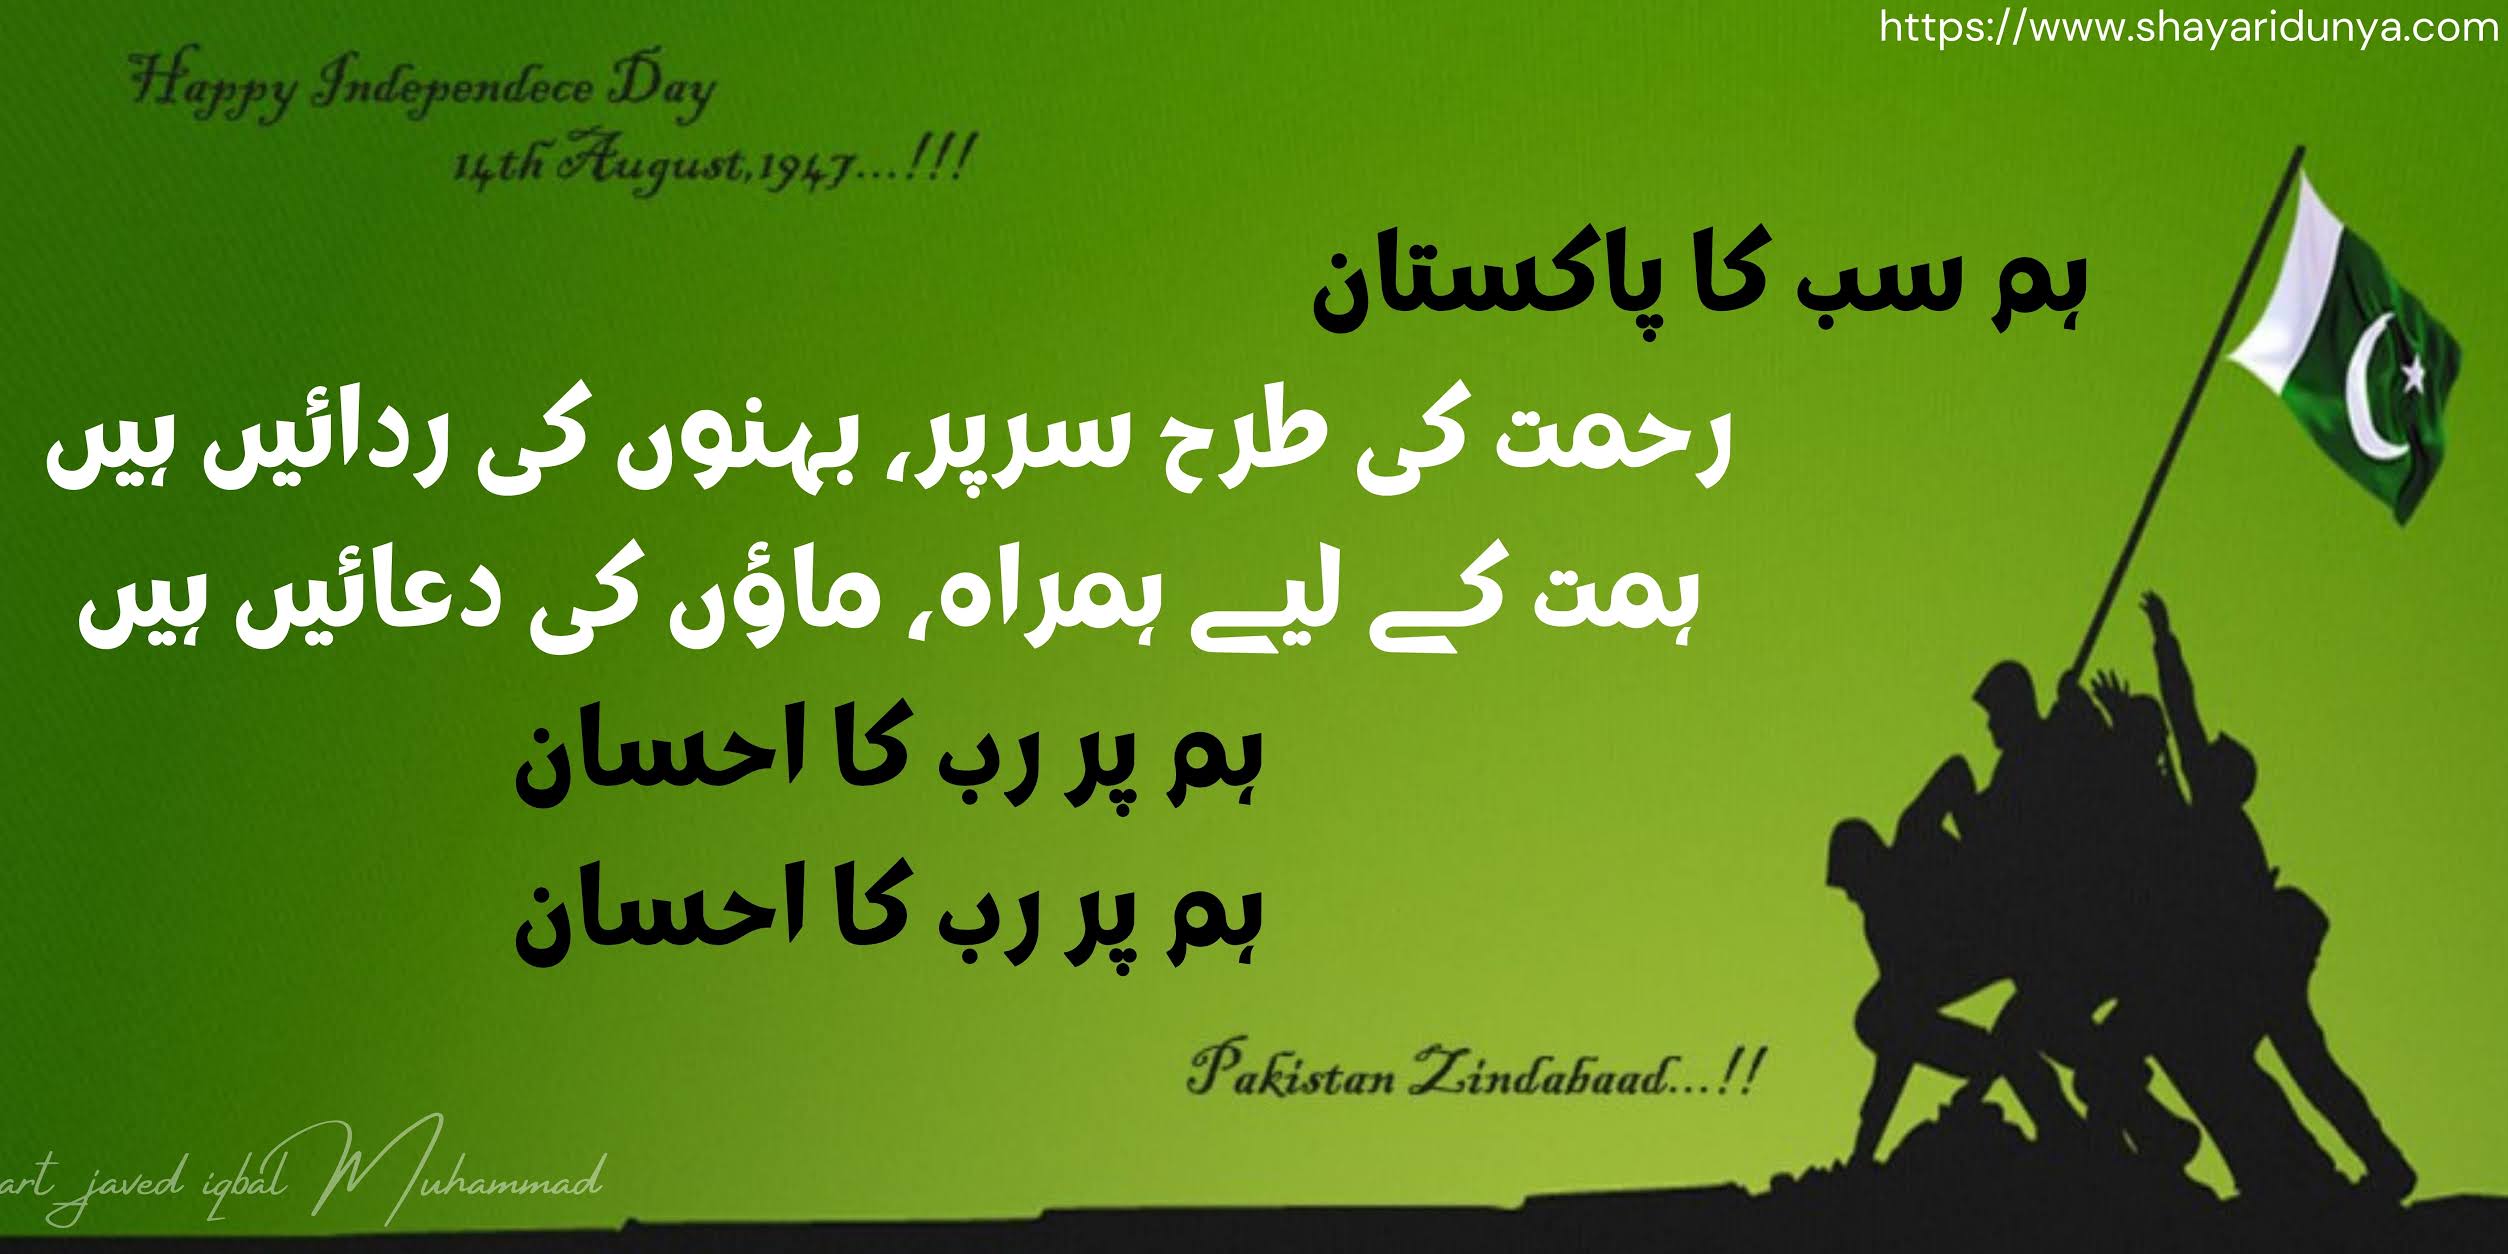 Happy Independence Day 14 August 1947 |14 August Urdu Poetry | Jashan-e-Azadi Shayari | Pakistan Independence Day Pictures 2021